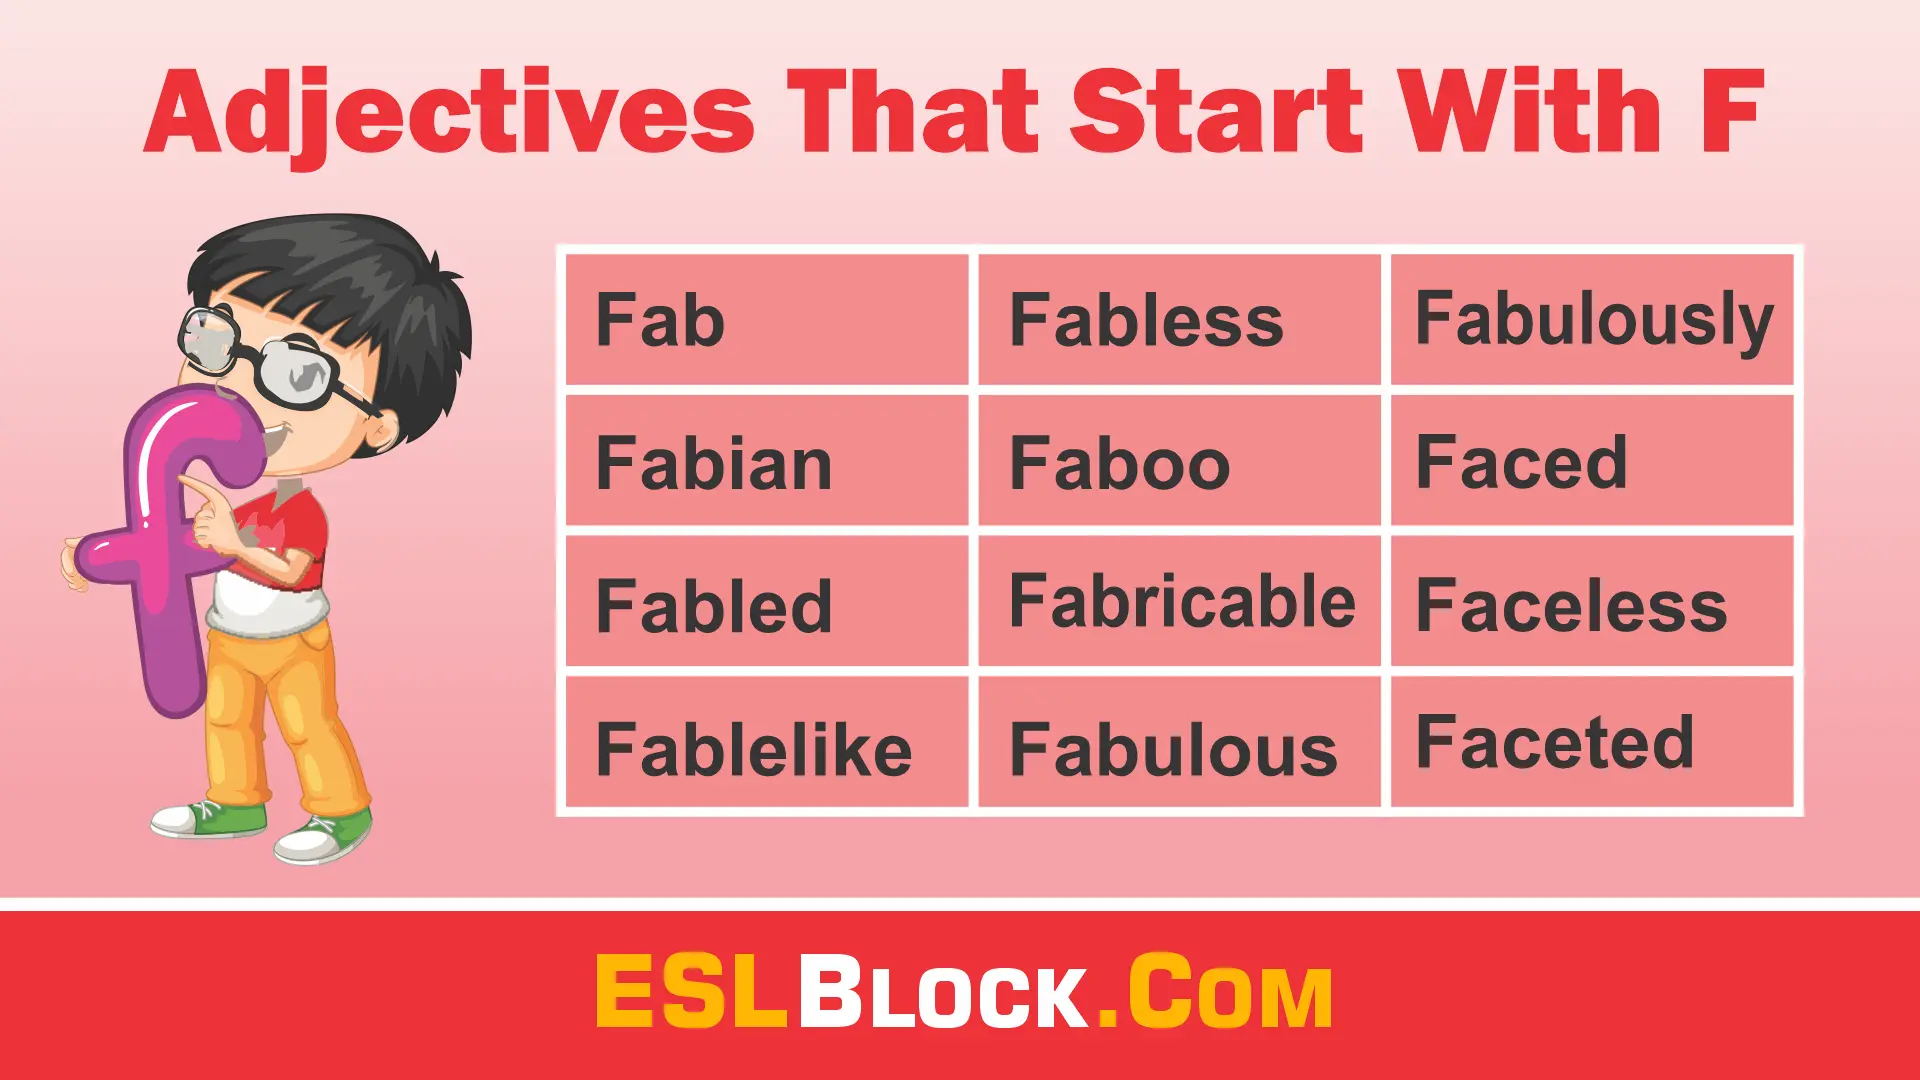 A-Z Adjectives, Adjective Words, Adjectives, F Words, Vocabulary, Words That Describe a Person, Adjectives that start with F